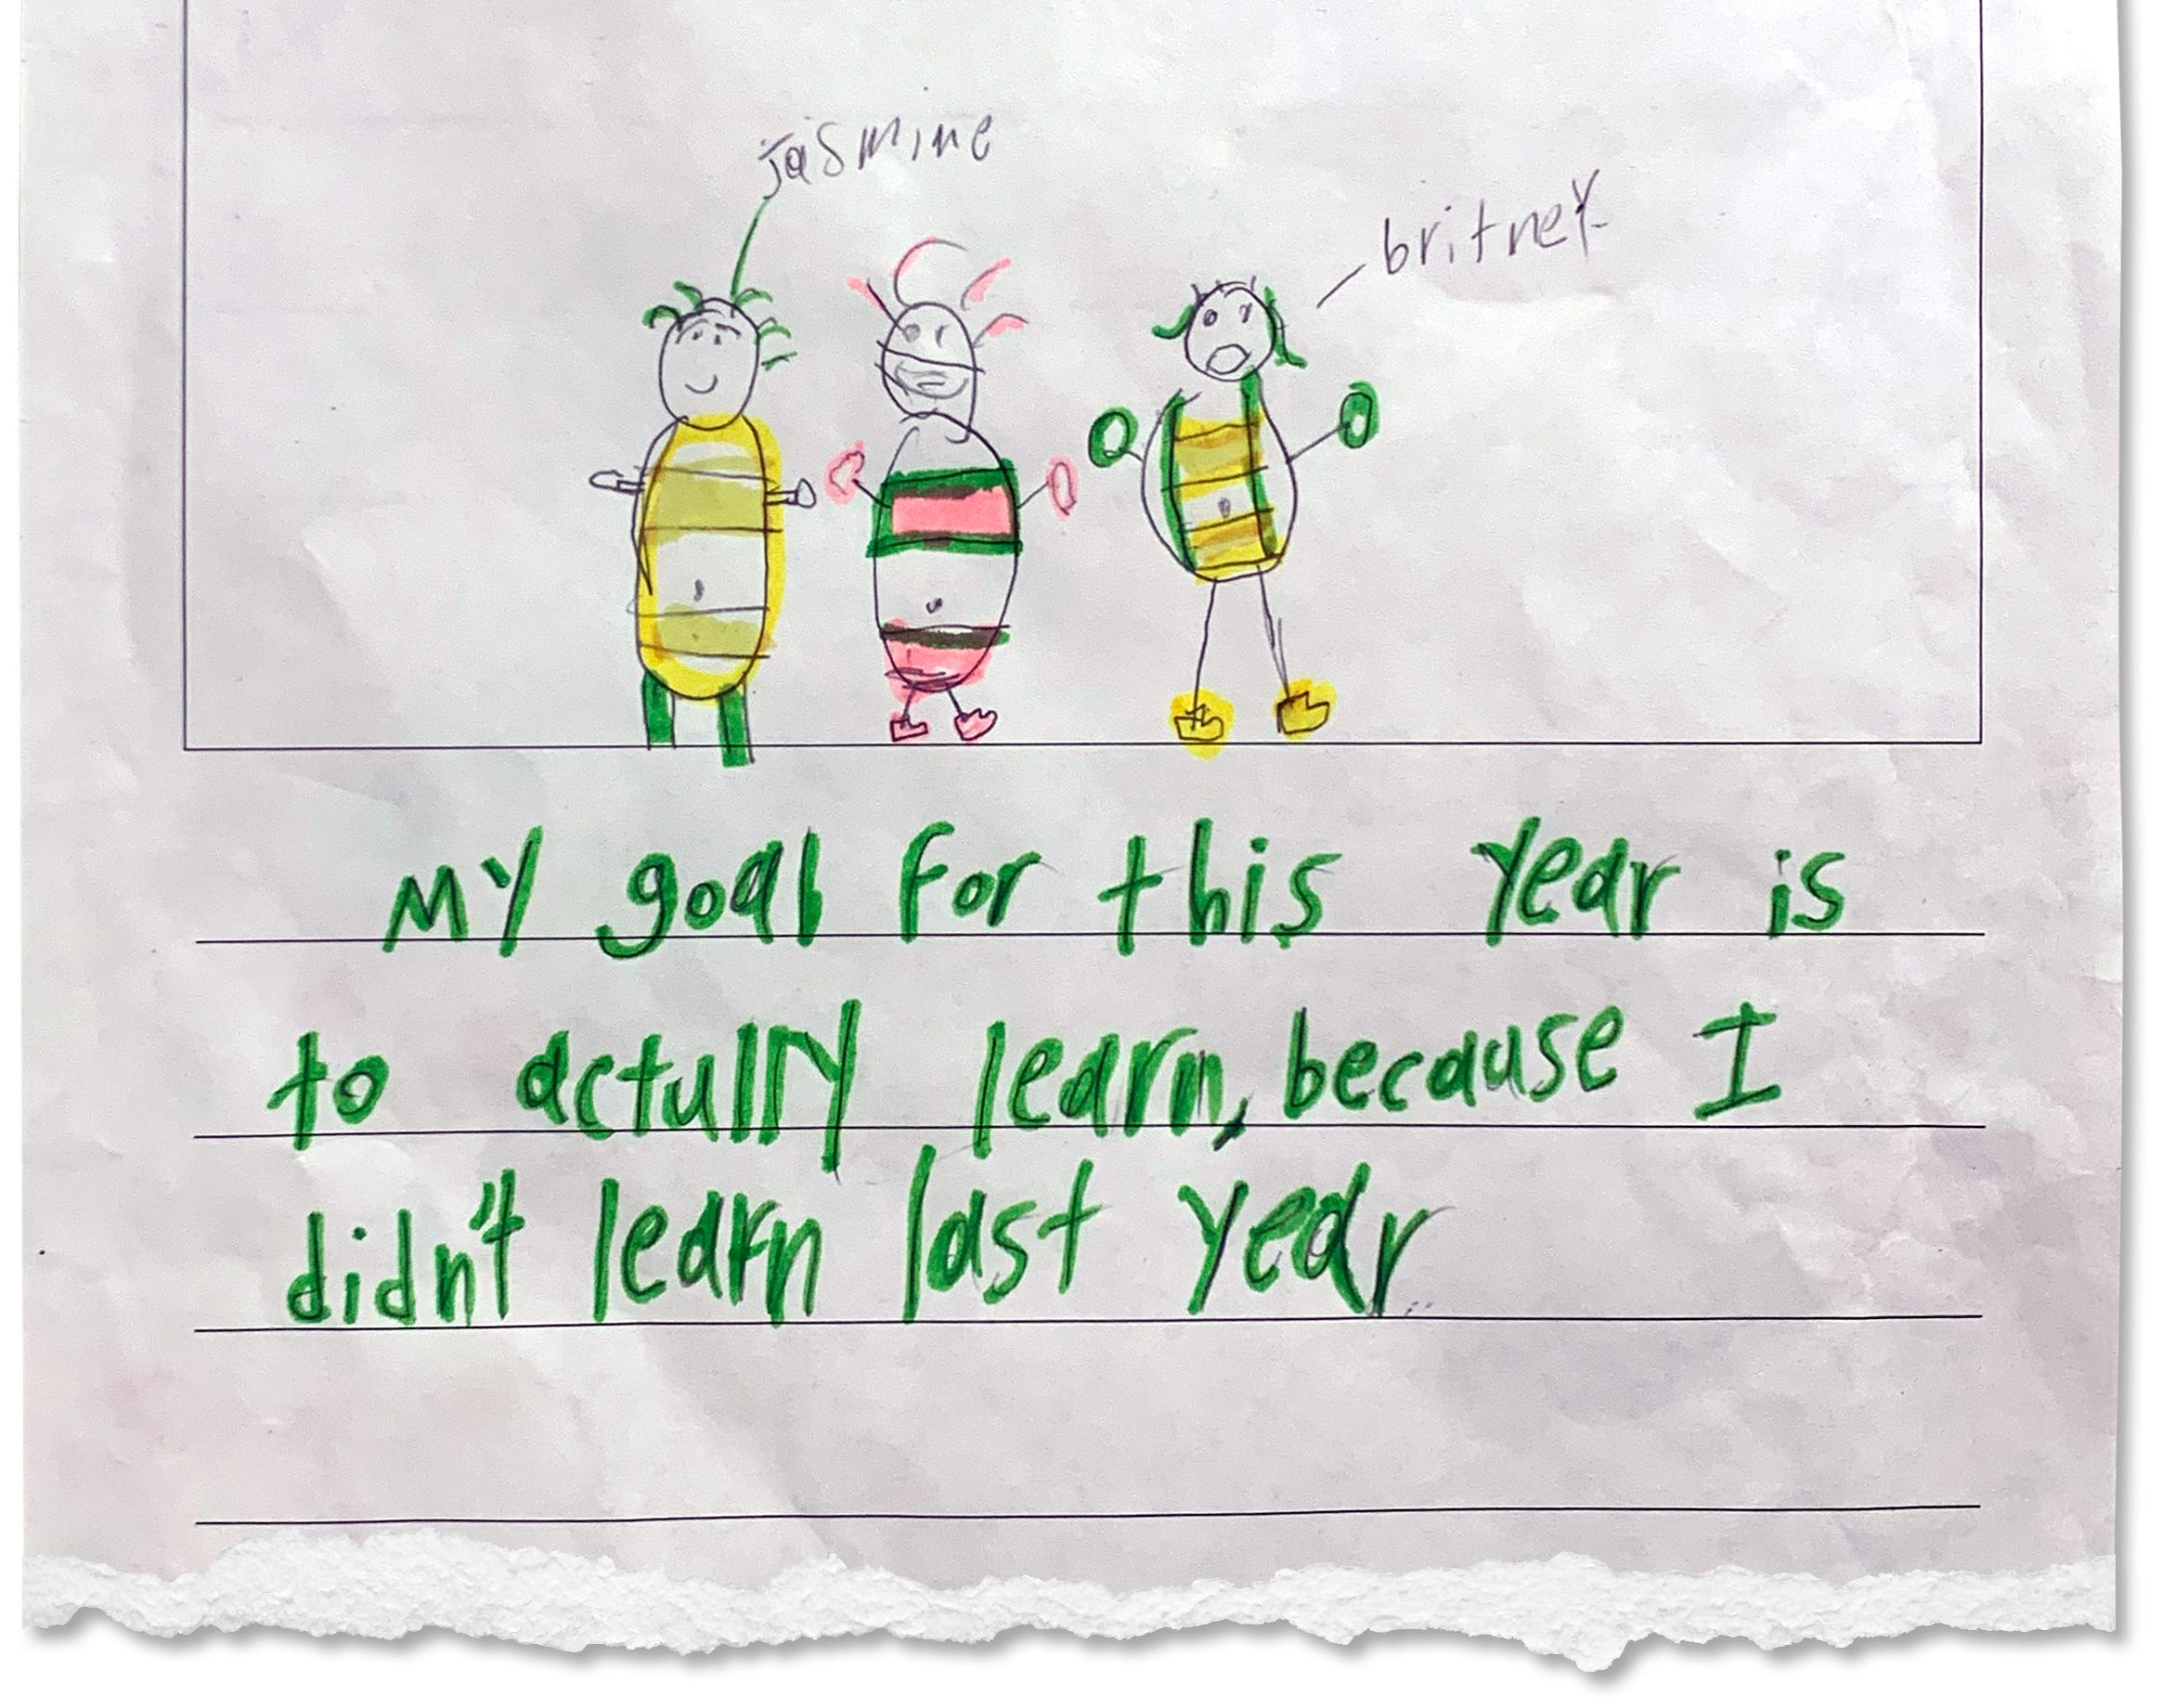 A student at Downer Elementary in San Pablo, Calif., shares her hopes for the school year: "My goal for this year is to [actually] learn, because I didn't learn last year."